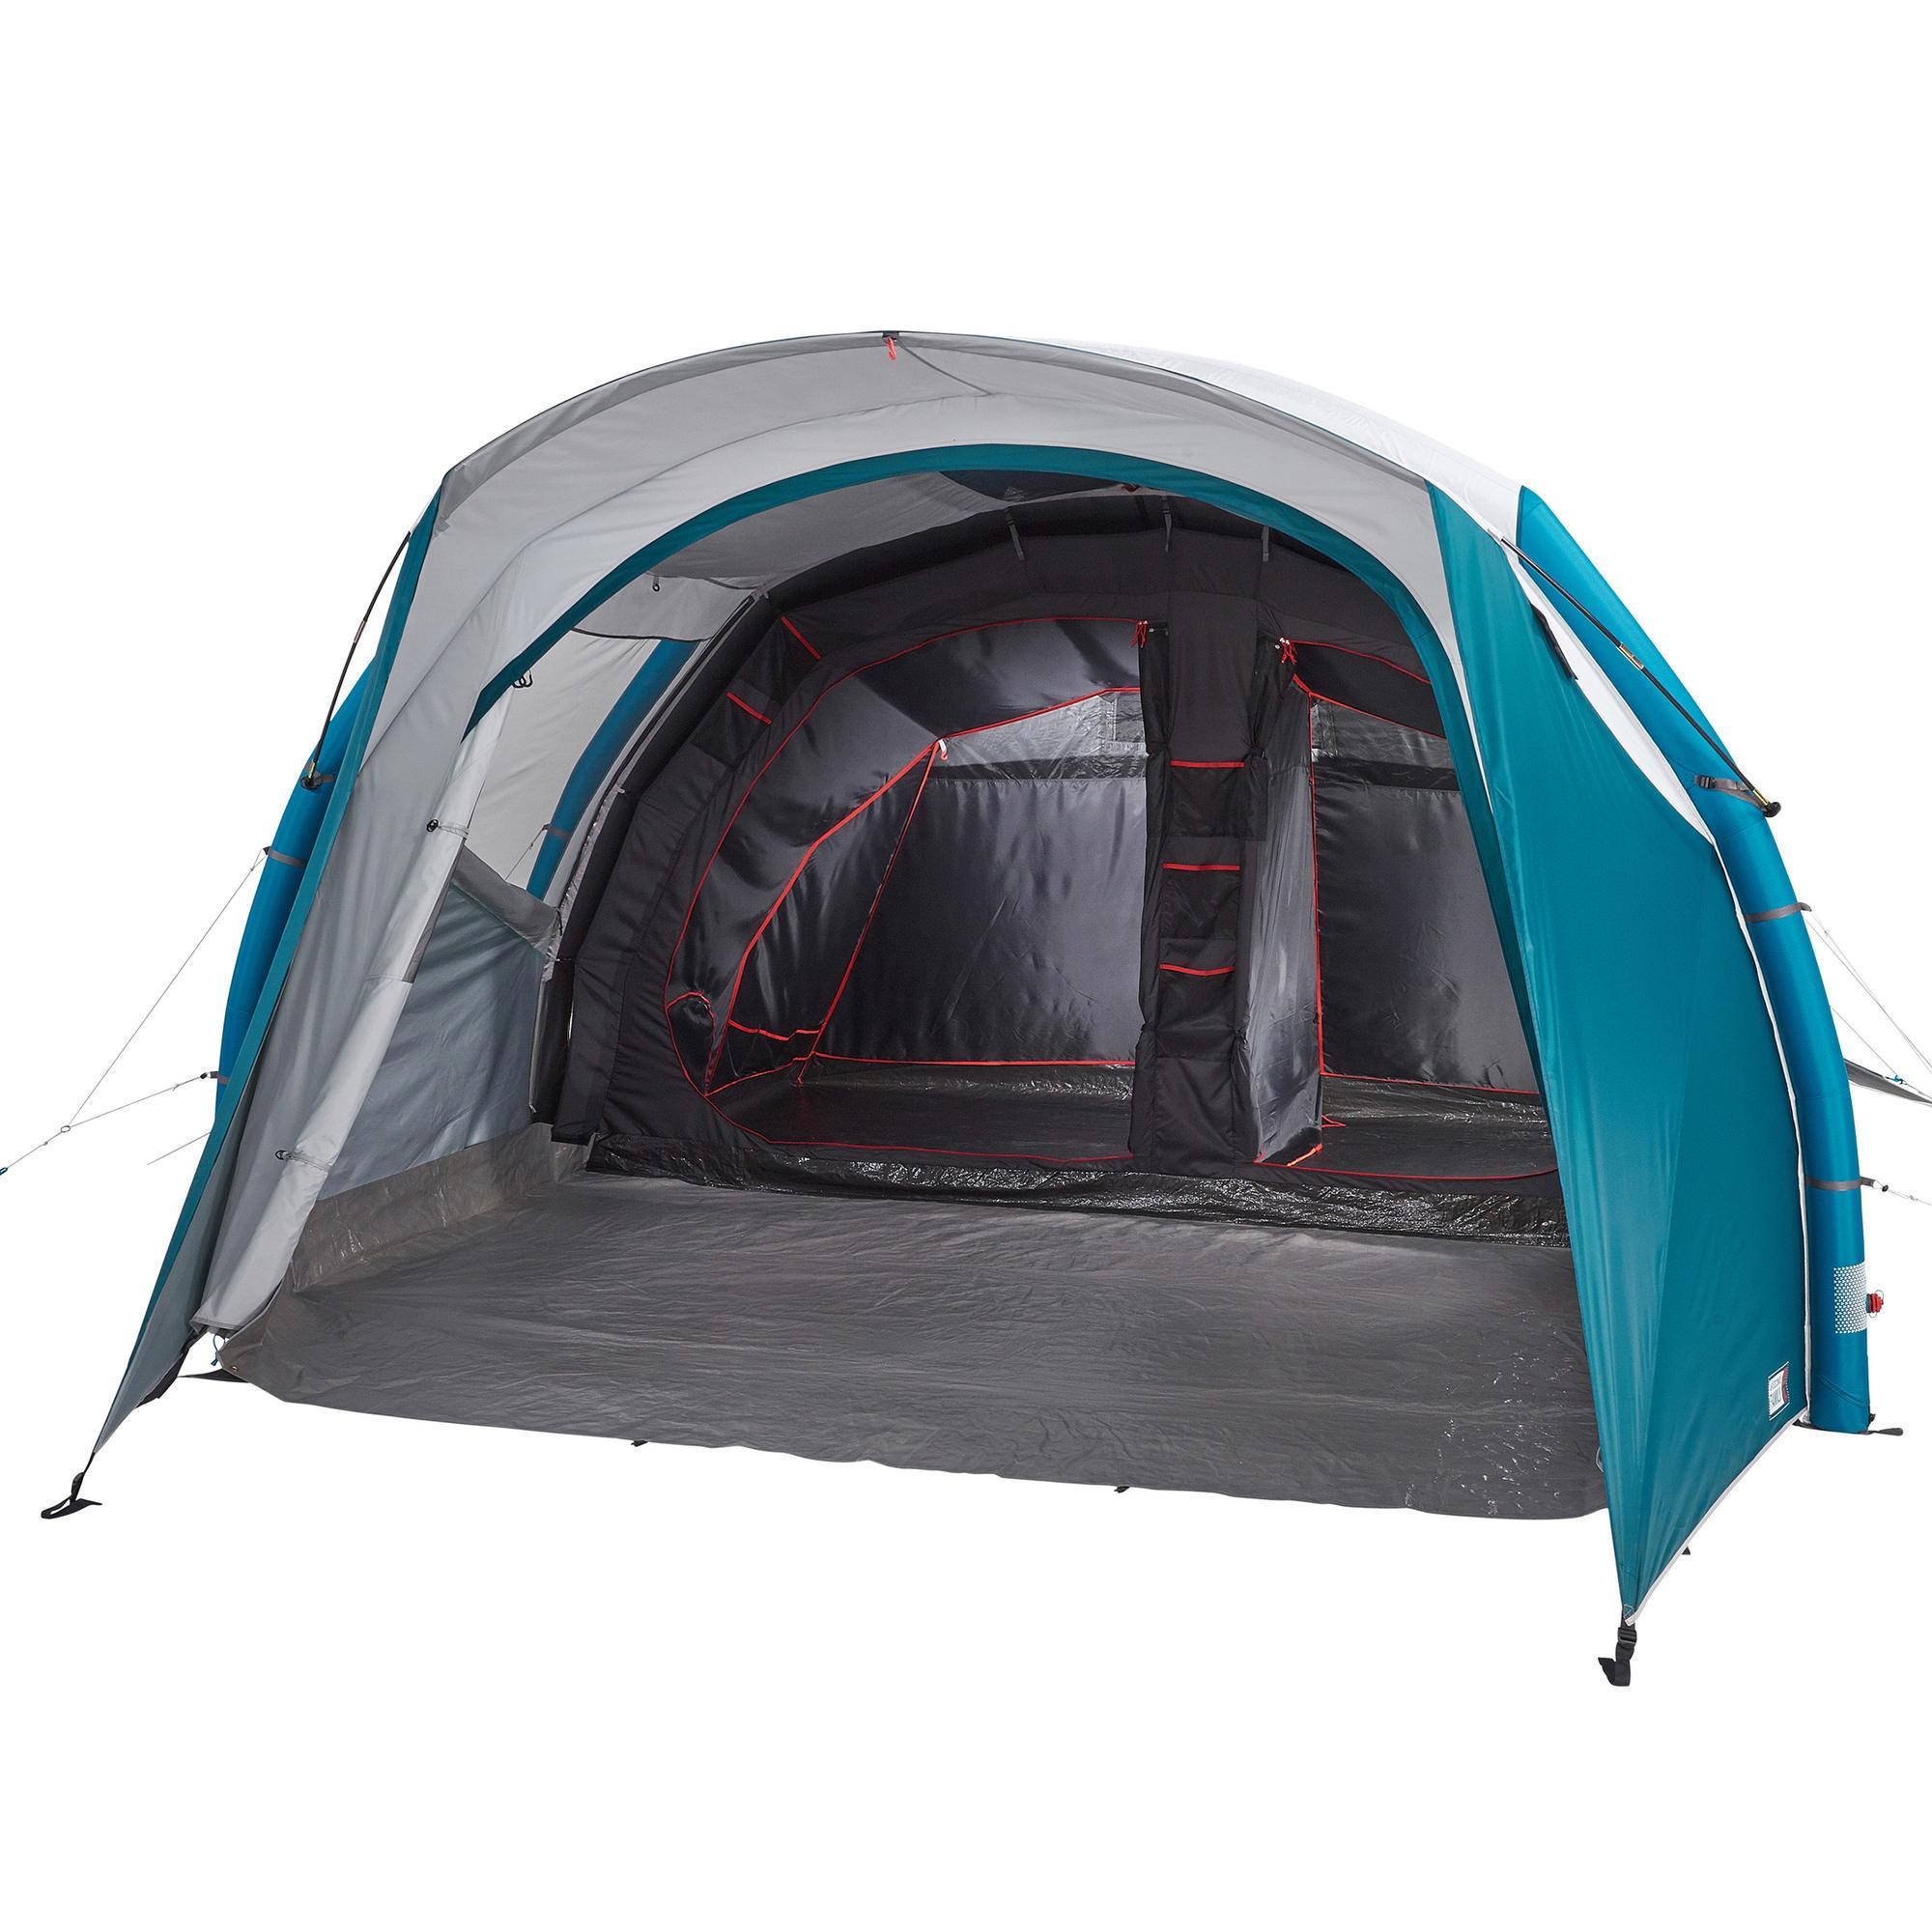 Inflatable camping tent - Air Seconds 5 